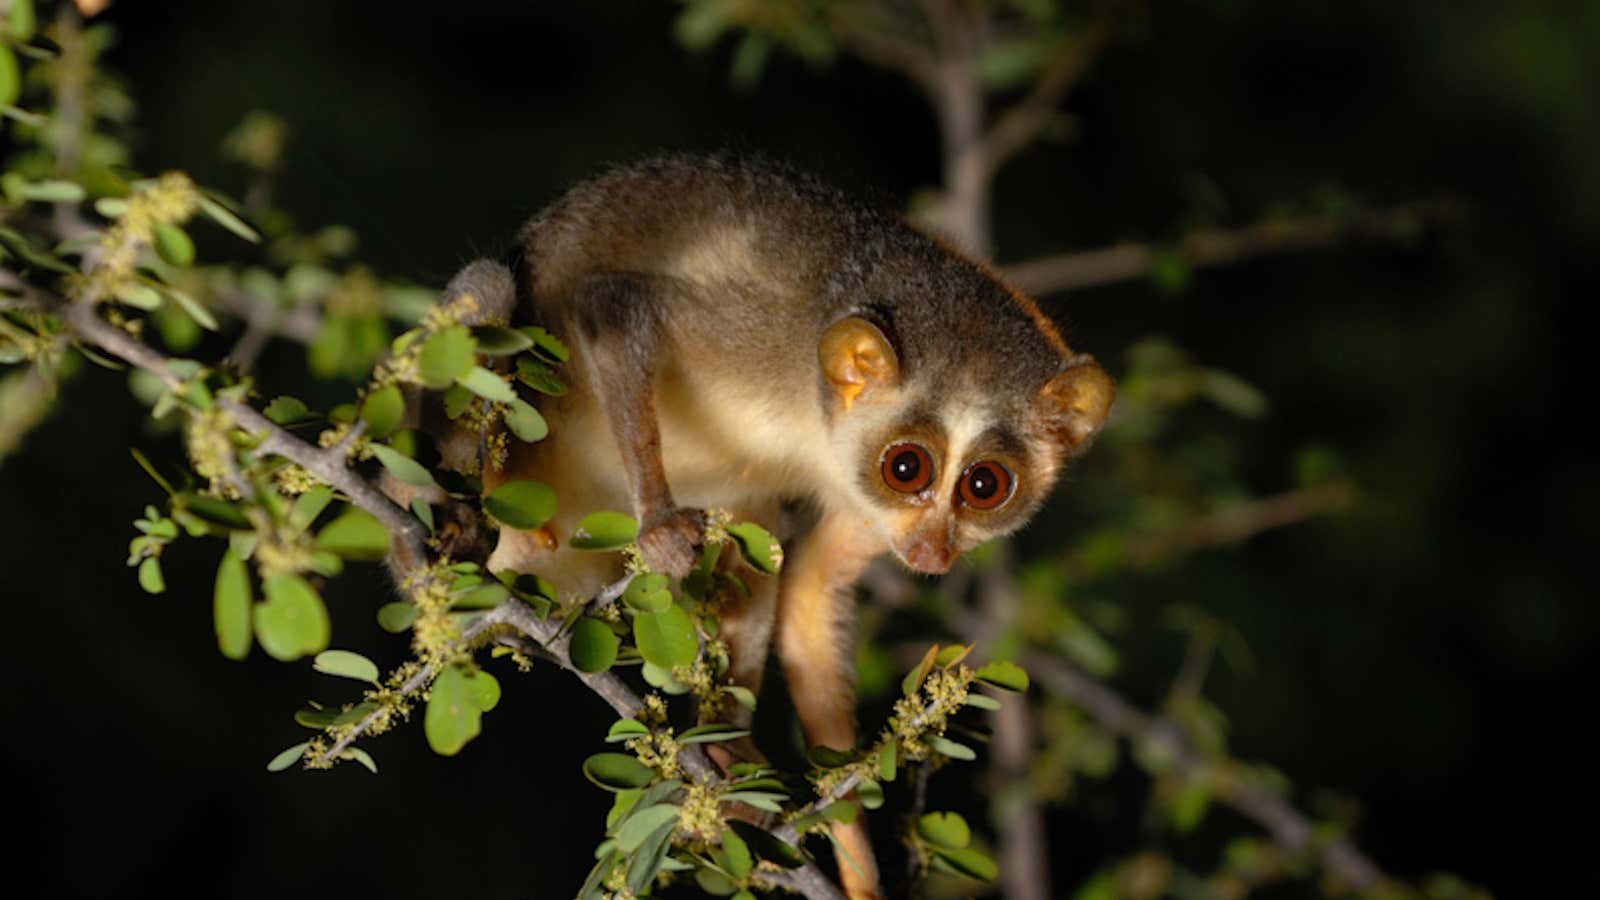 The slender loris is known as kaadu papa in Kannada, meaning forest baby.